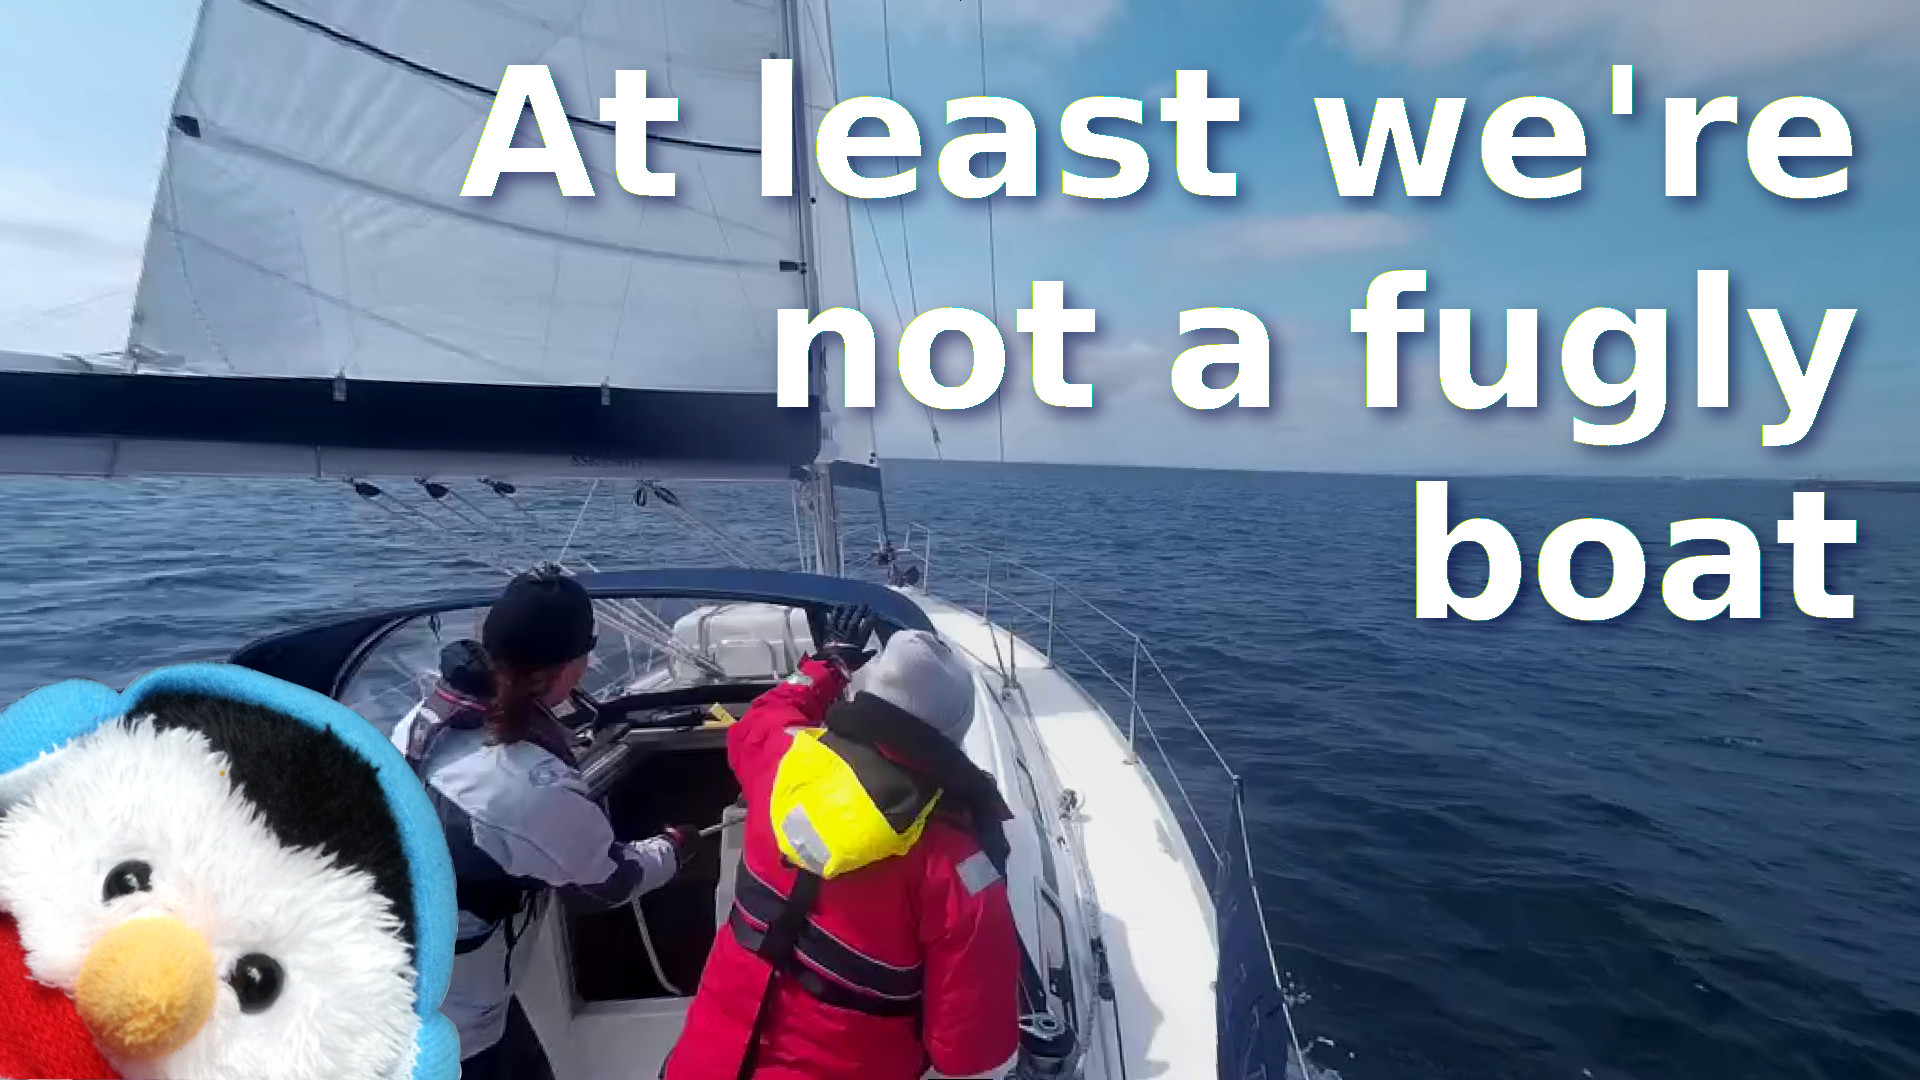 Watch our "At least we're not a fugly boat" video and add comments